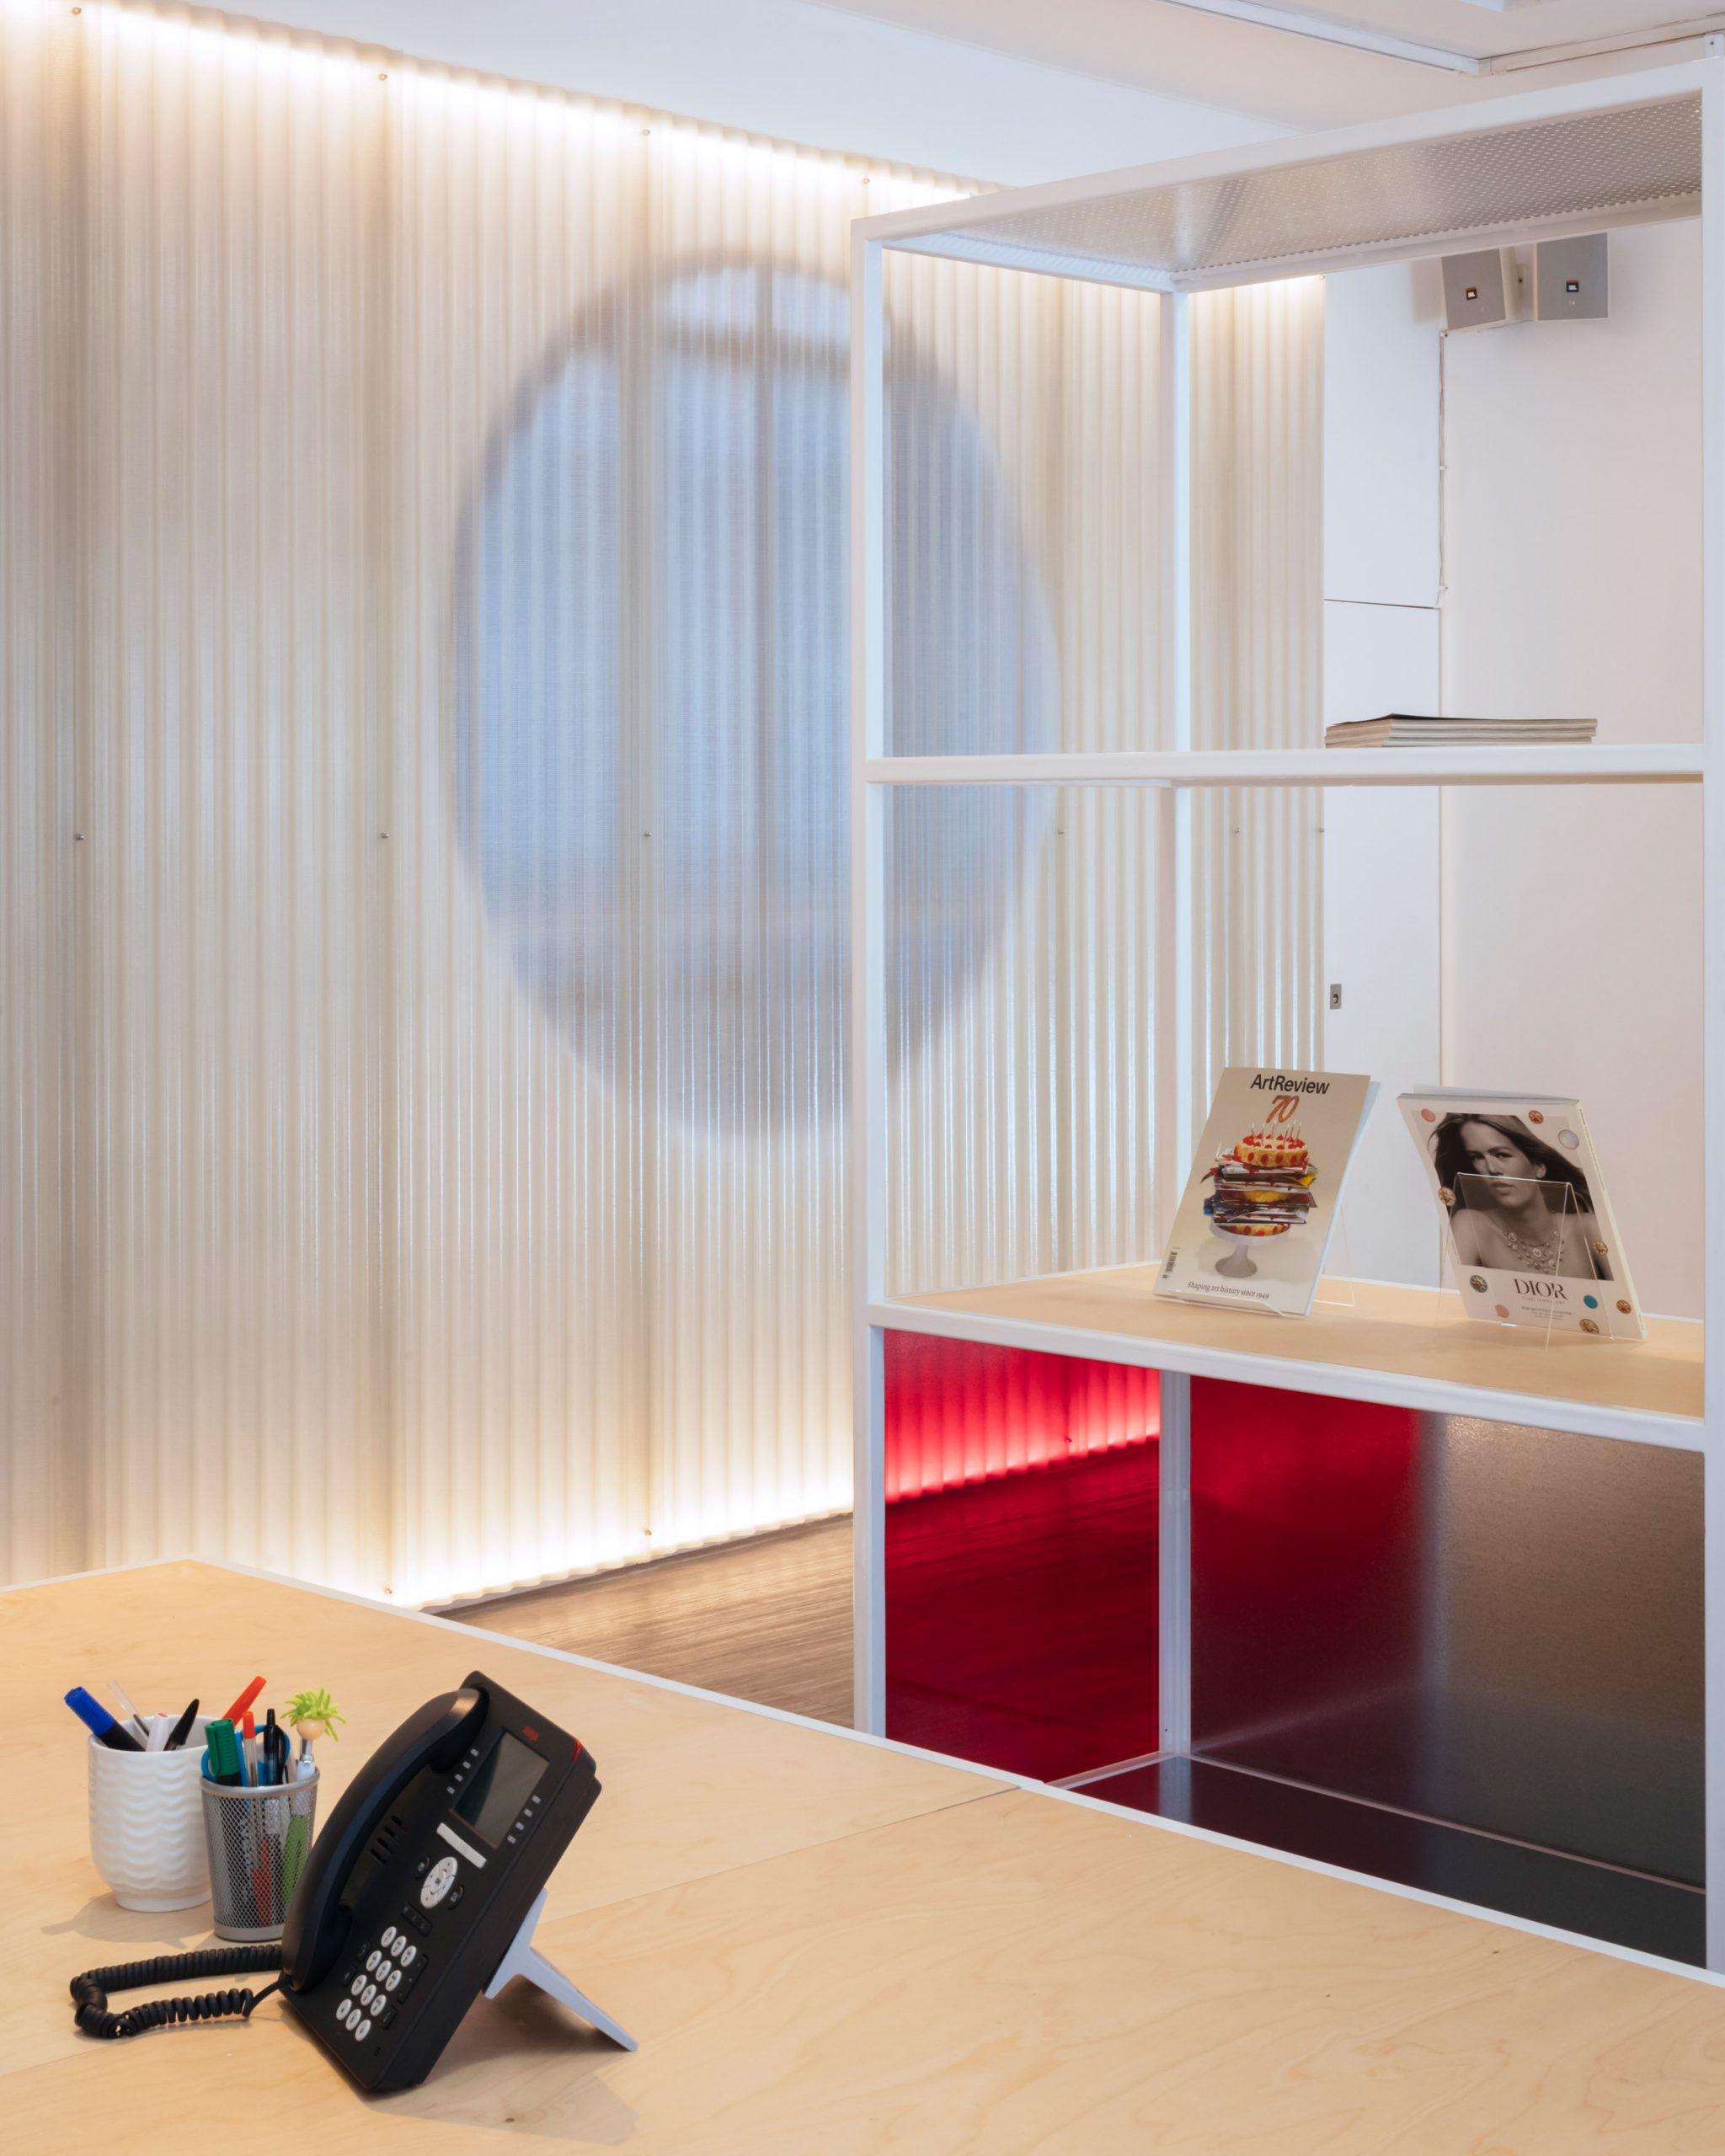 Translucent paneling in office